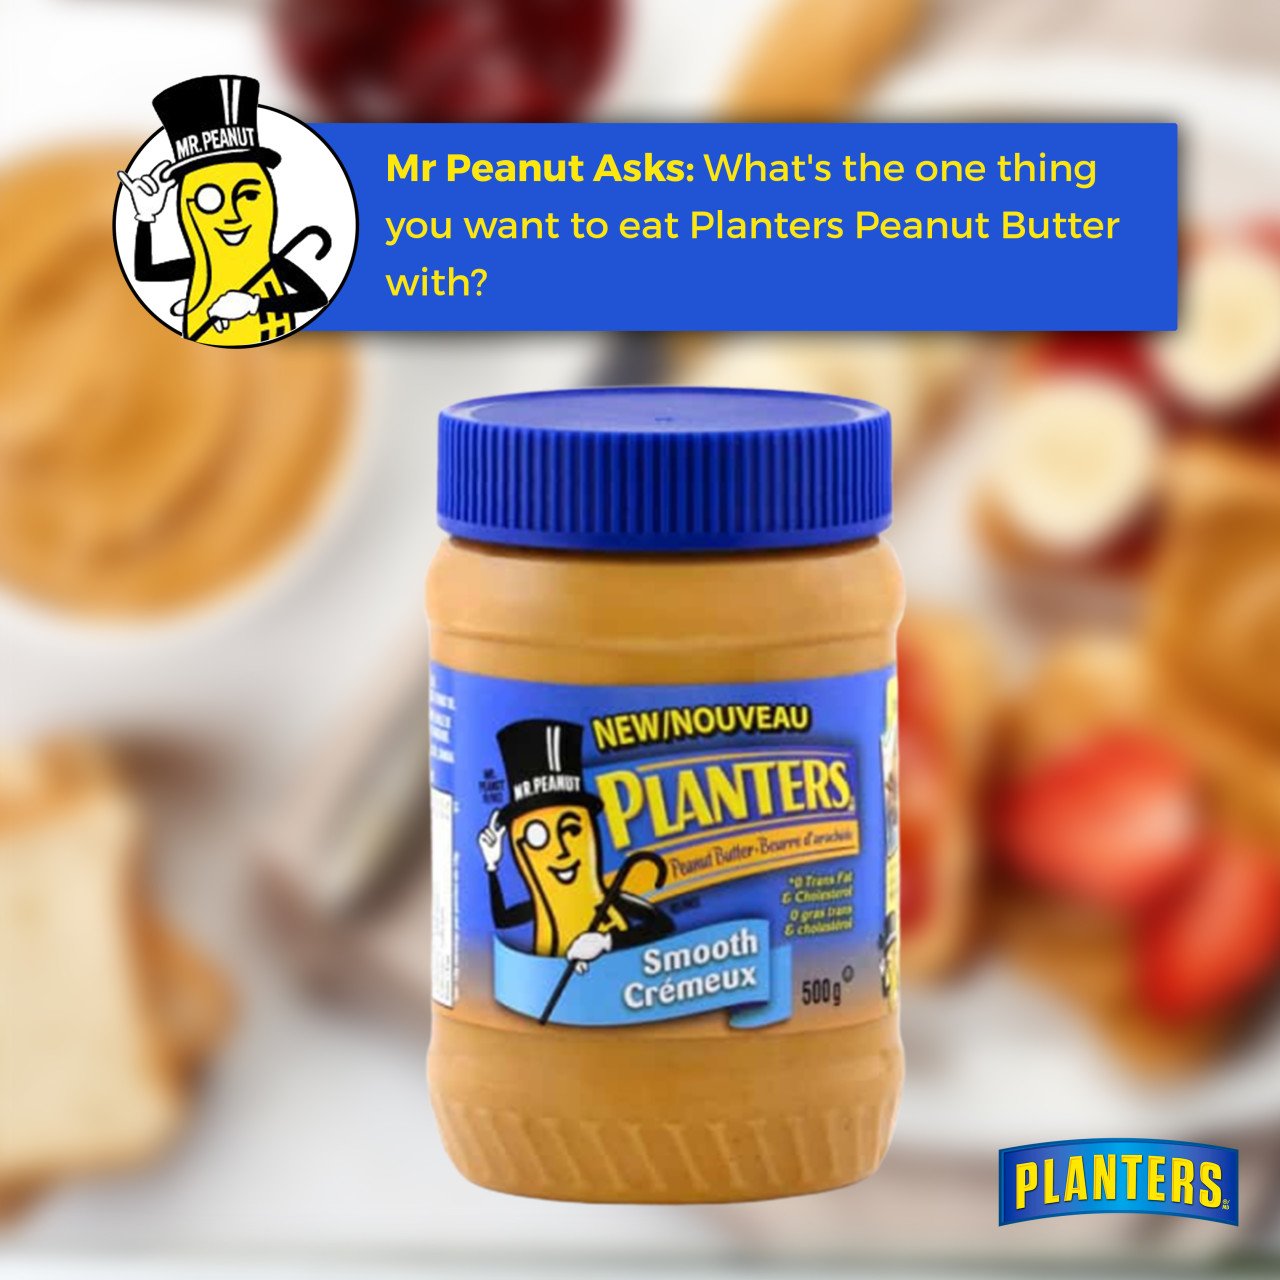 Mr Peanut on Twitter: "Mr. Peanut Asks: What's the one thing you want to  eat Planters Peanut Butter with? #MrPeanutAsks #MrPeanuts  #WednesdayInspirational #PeanutButter #PBJ #PlantersPeanutButter  #PlantersSnacks #PlantersCanada https://t.co/8SYLjTAVfn ...